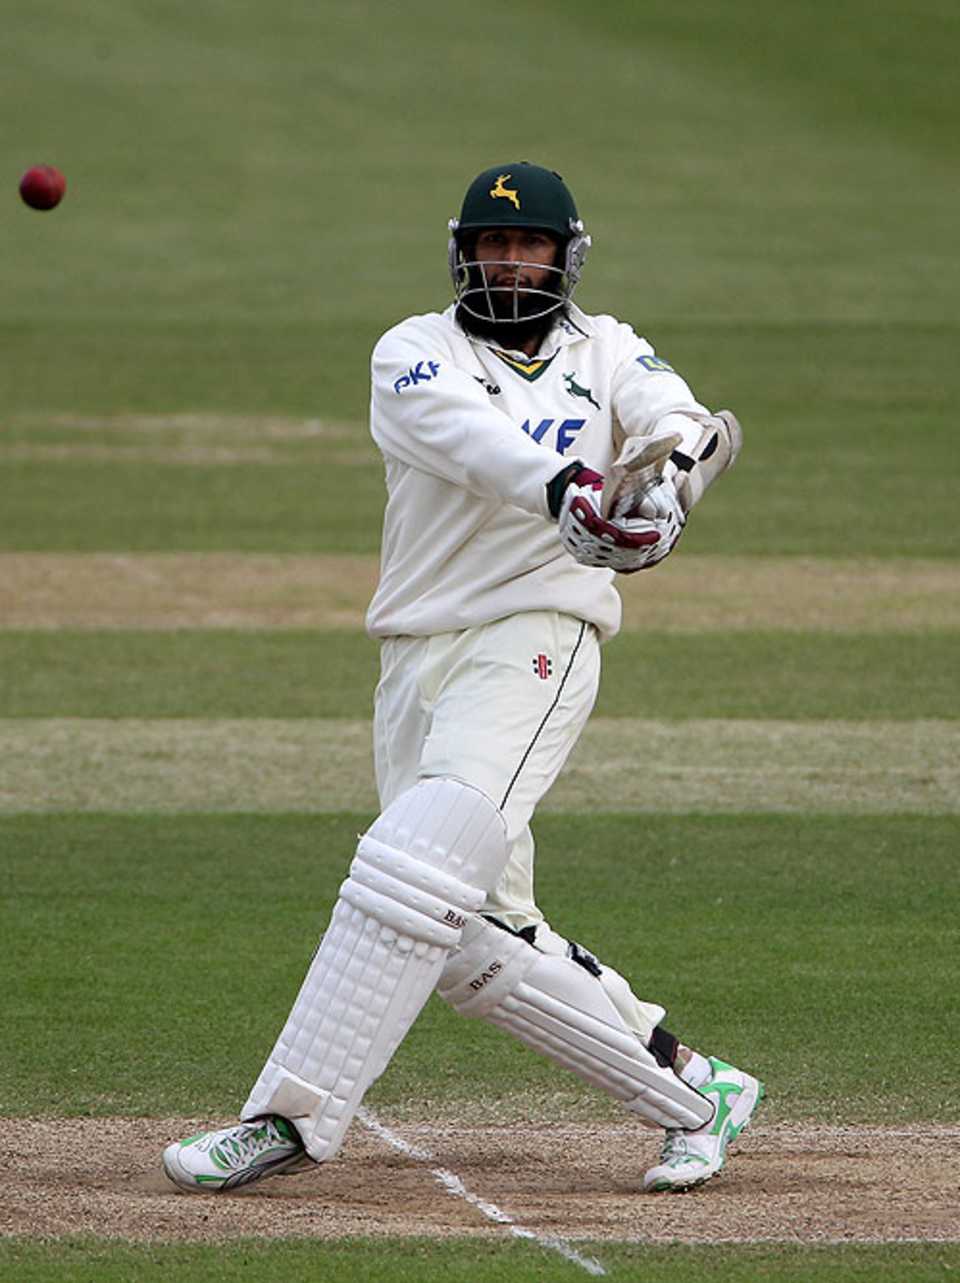 Hashim Amla pulls in front of square during his final-day half-century, Hampshire v Nottinghamshire, County Championship Division One, Rose Bowl, Day 4, May 7, 2010